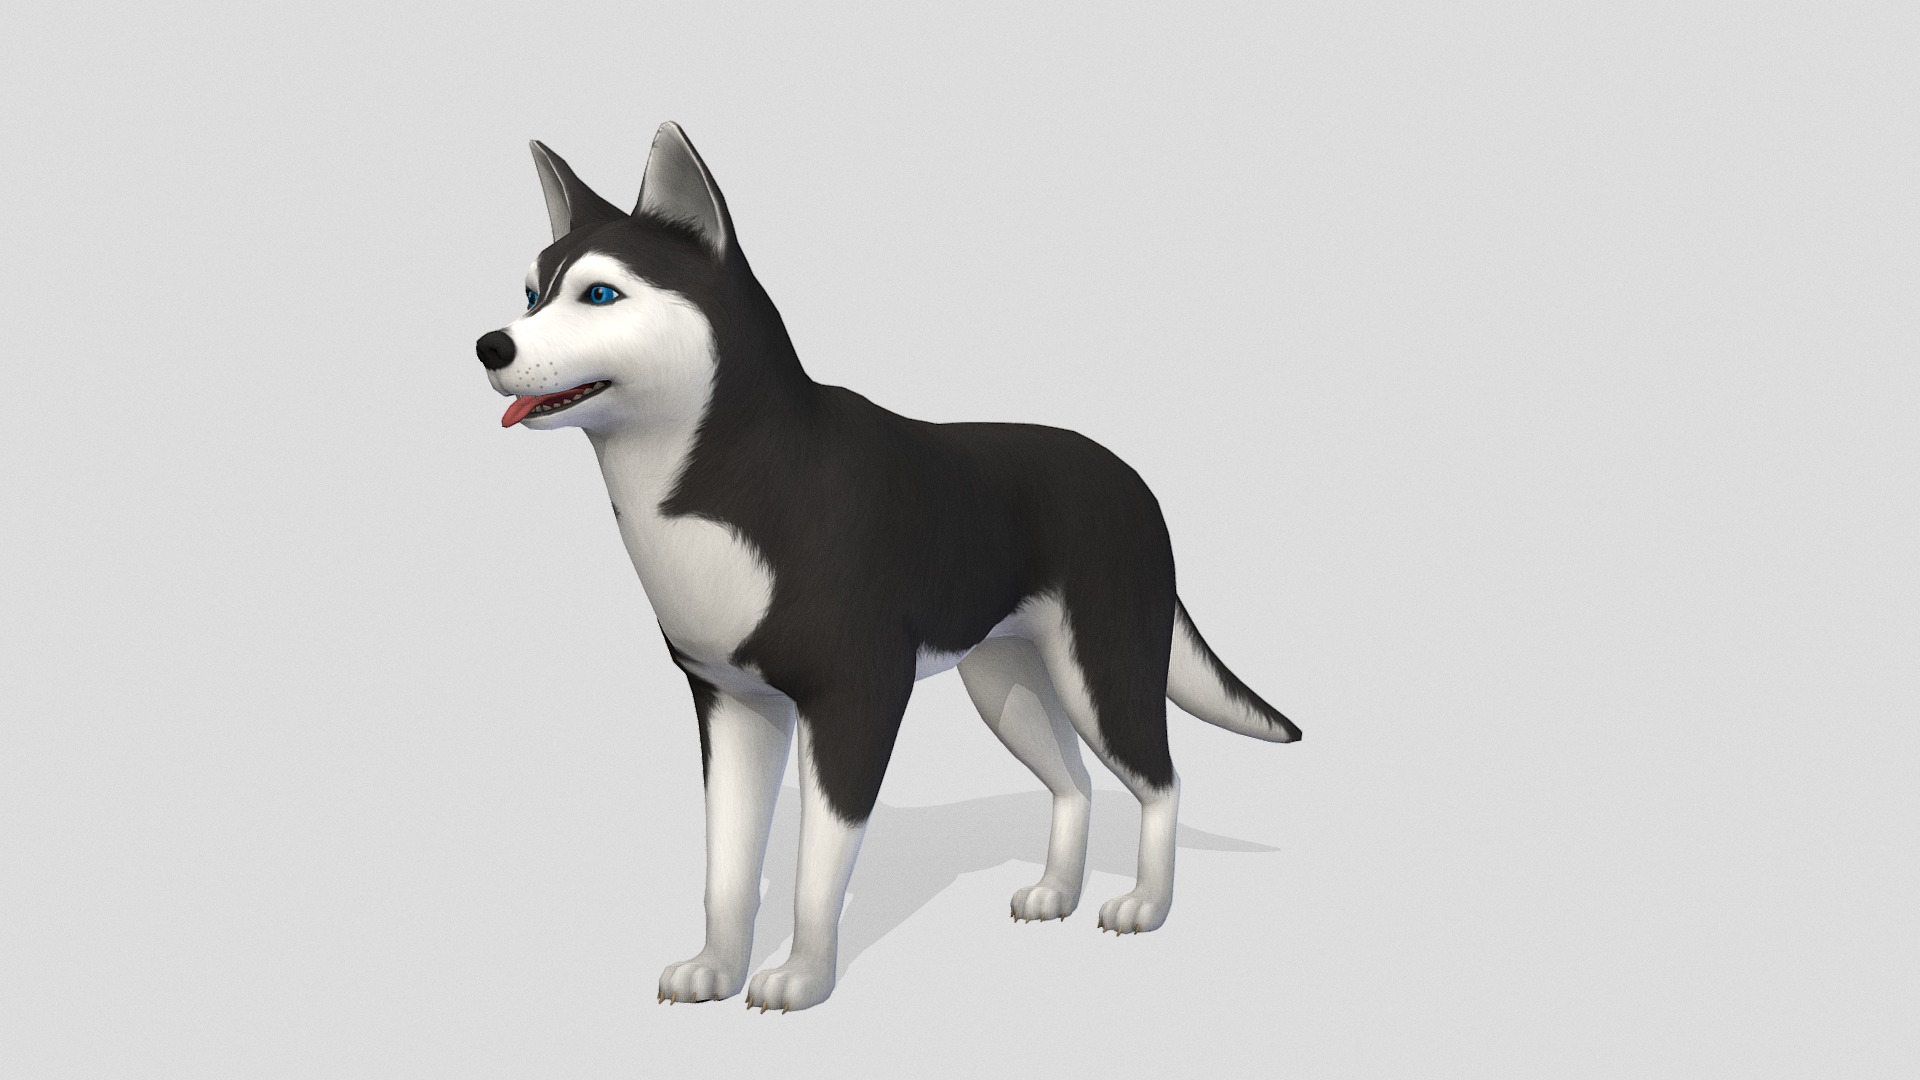 3D model Husky dog - This is a 3D model of the Husky dog. The 3D model is about a black and white dog.